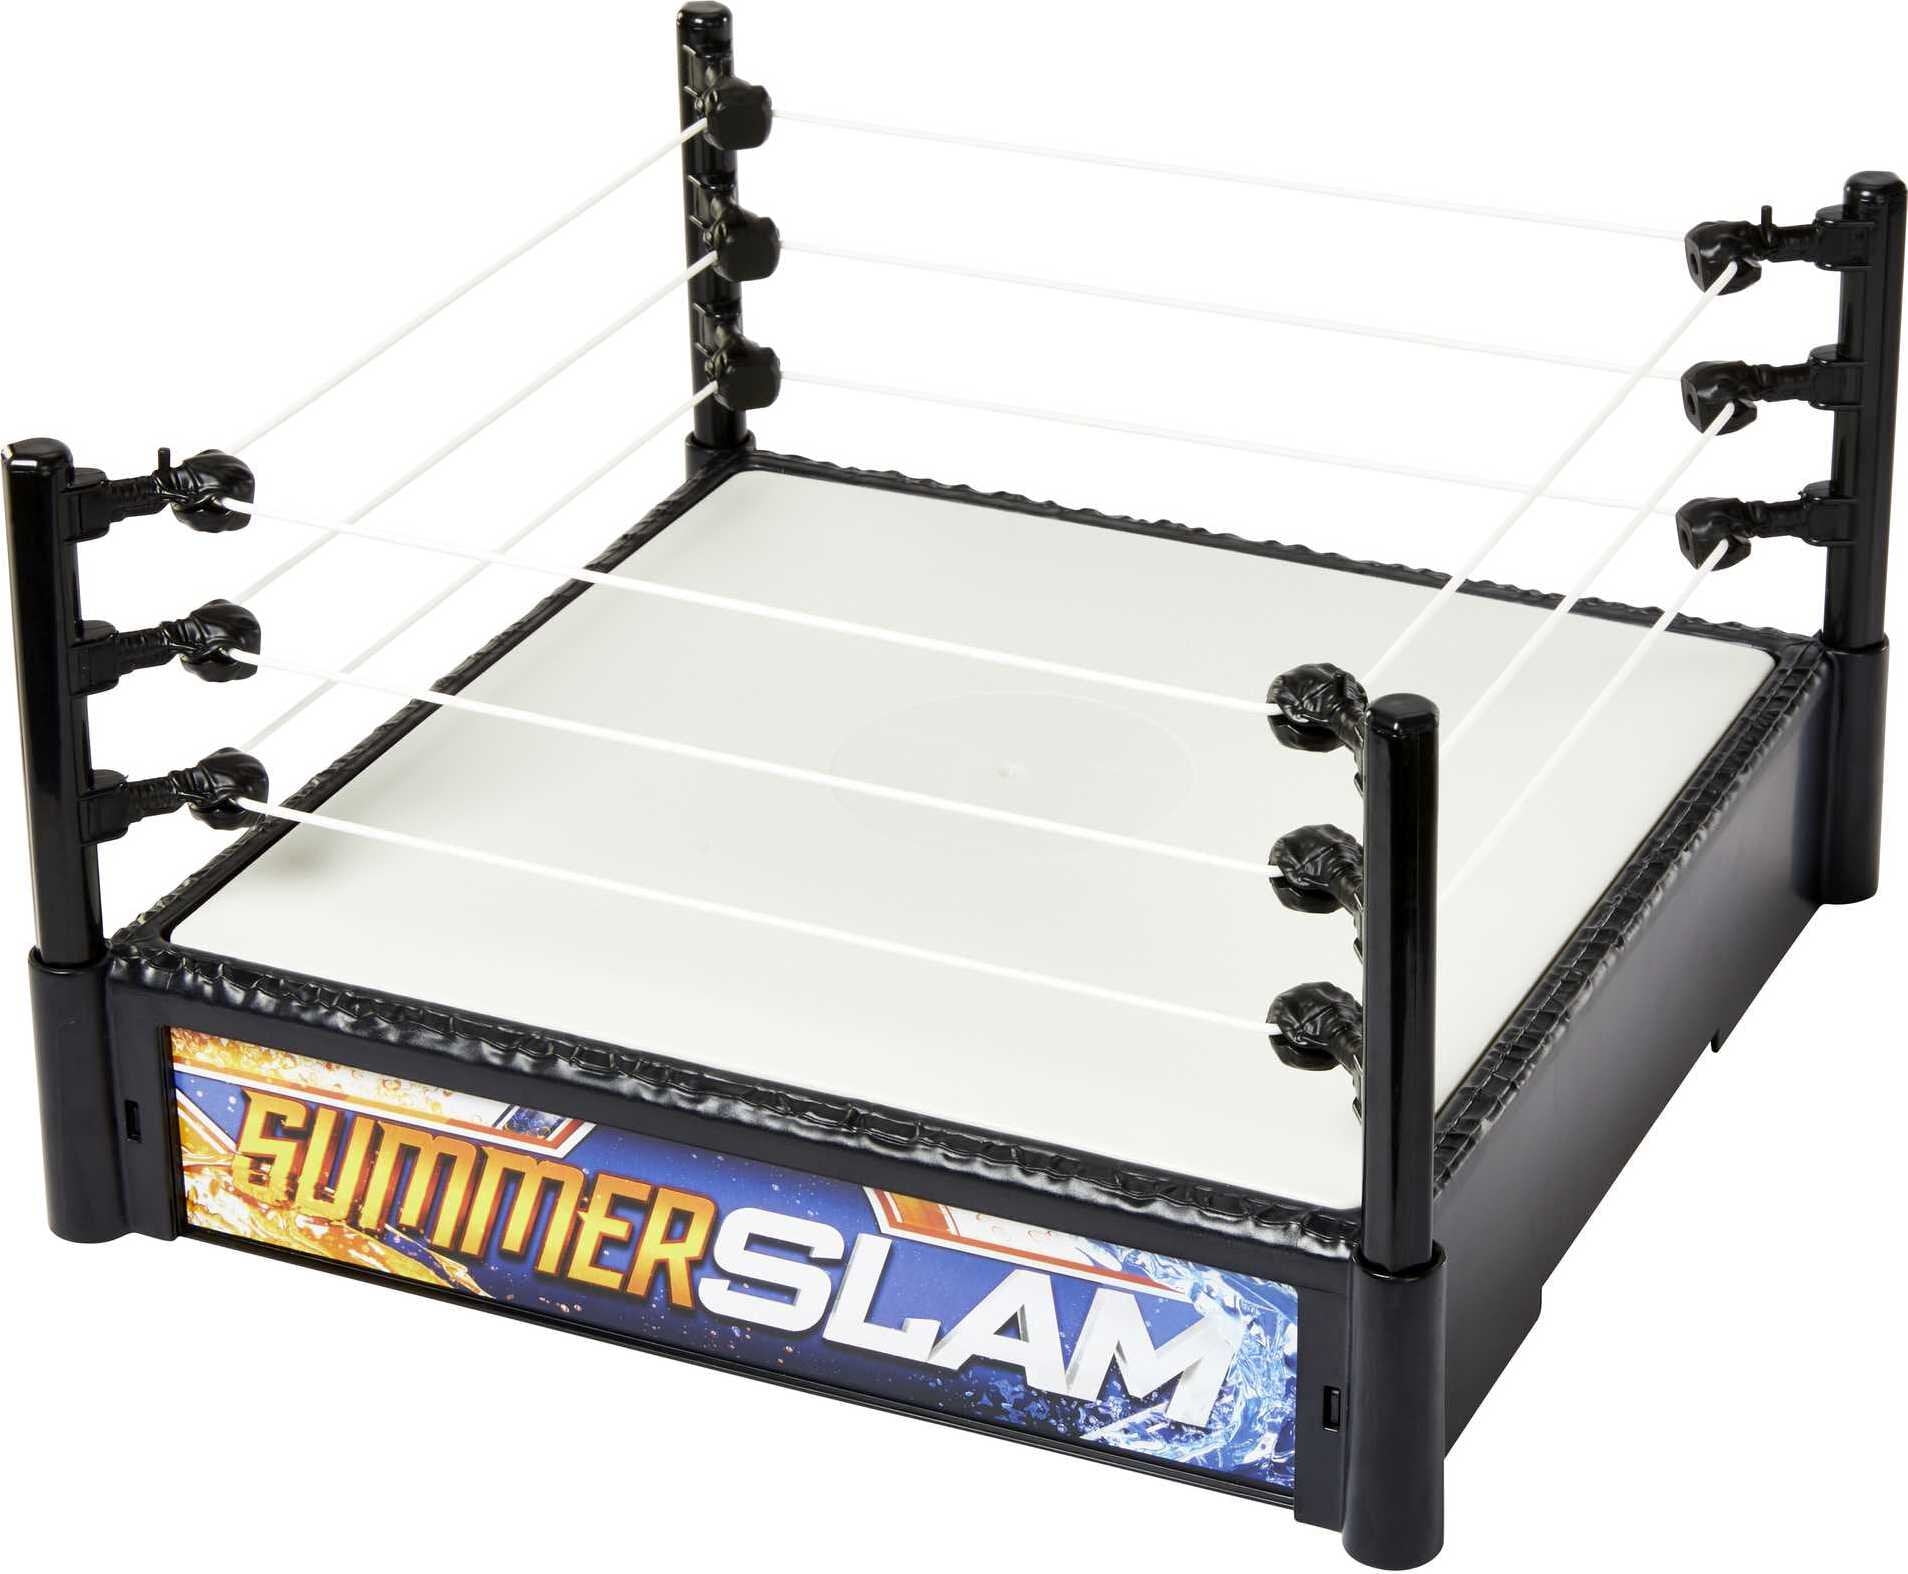 Zelden Rusteloosheid spanning WWE NXT Superstar Ring with Spring-Loaded Mat Playset, Great Gift for Kids  6 Years and Up - Walmart.com